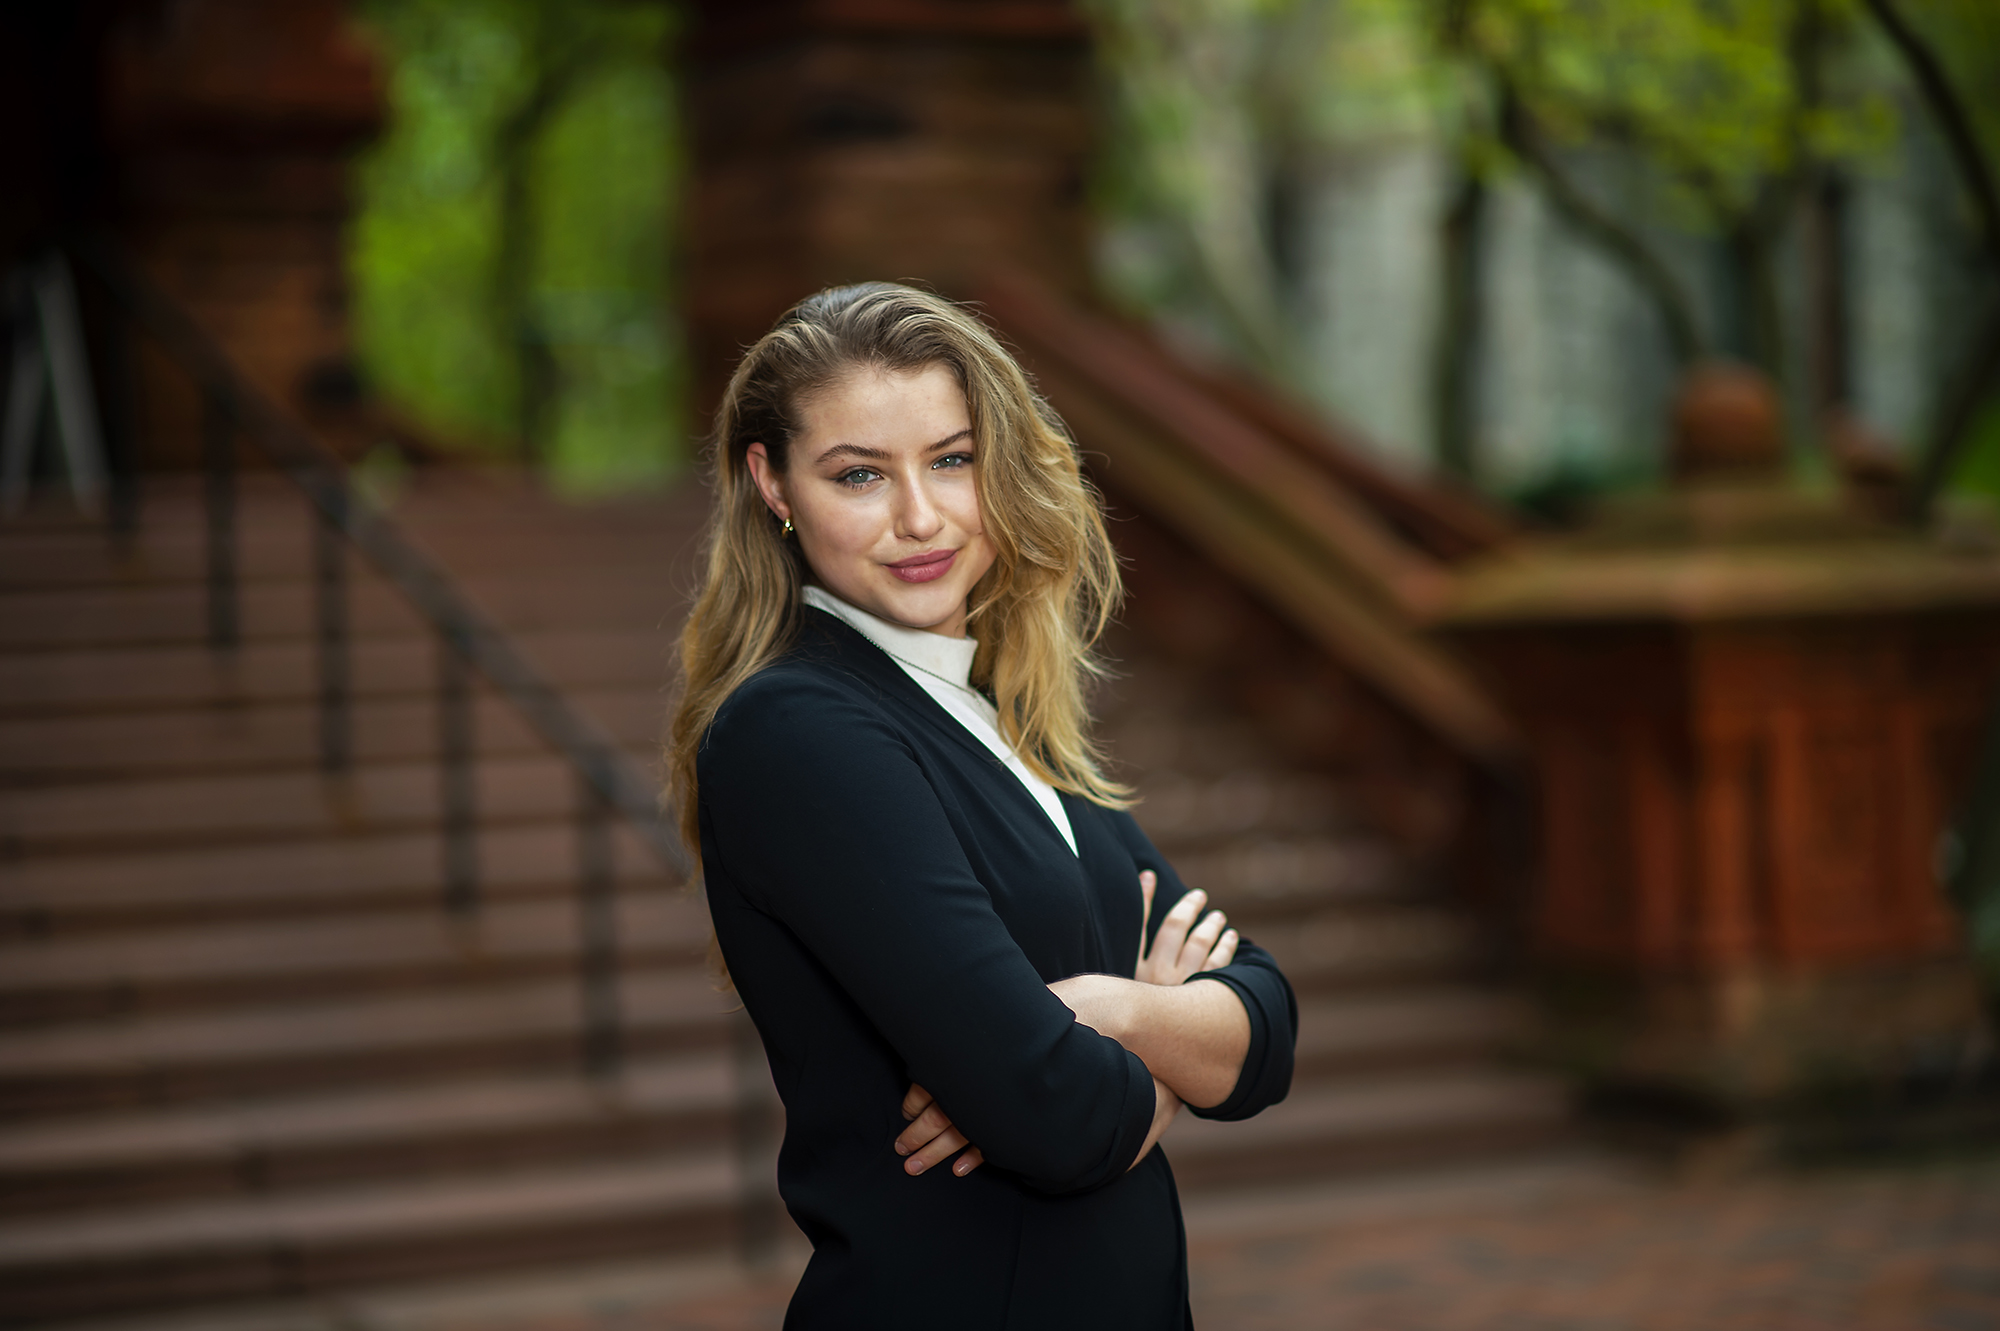 Woman with blond hair in a black suit with white mock turtleneck stands with arms crossed in front of a brown staircase and looks into the camera